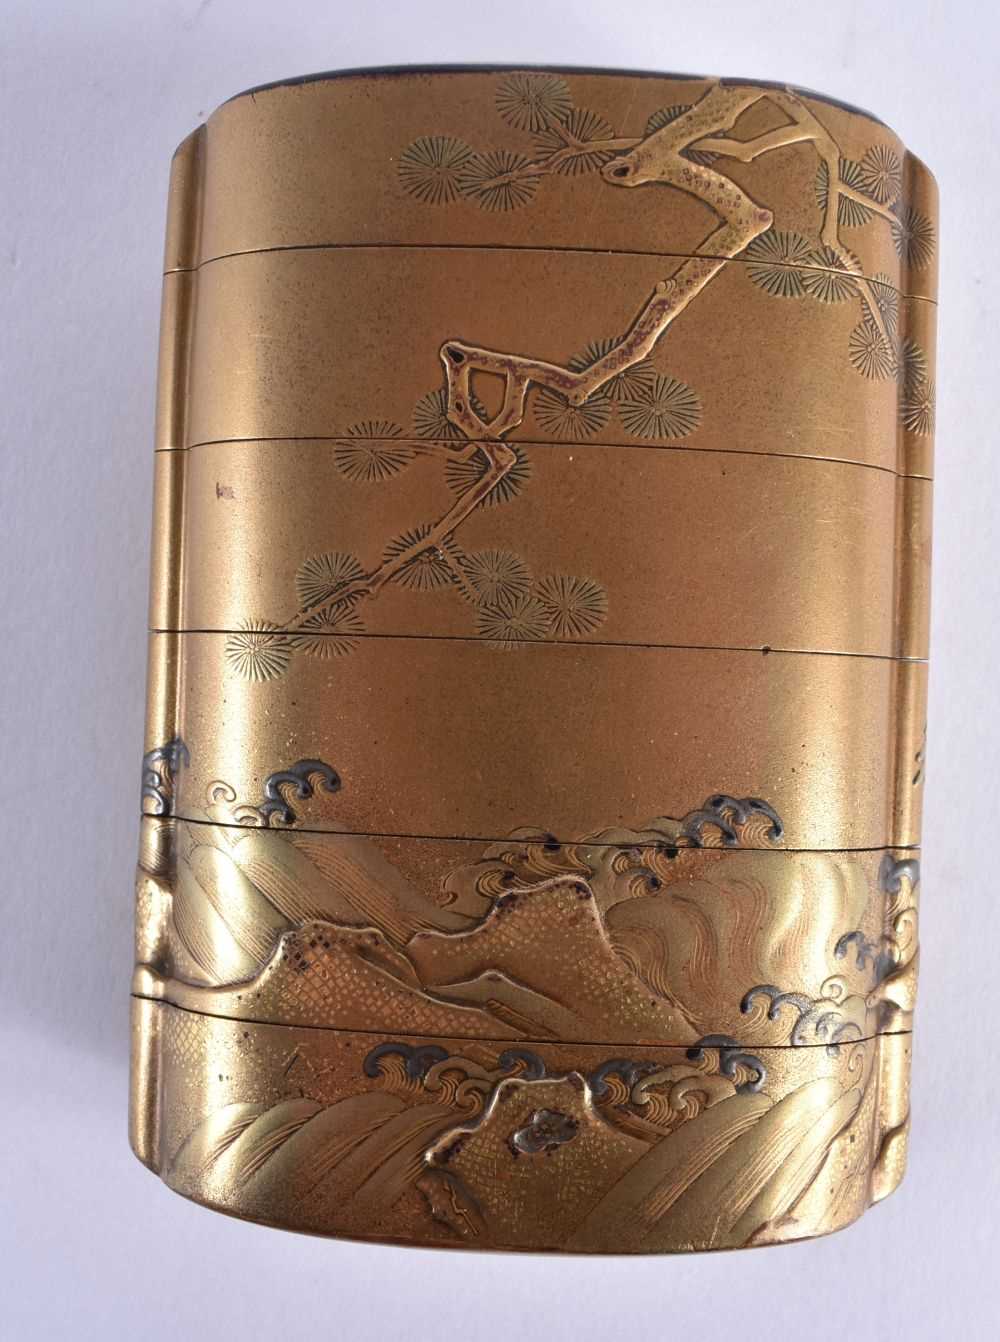 A FINE 19TH CENTURY JAPANESE MEIJI PERIOD GOLD LACQUER FIVE CASE INRO decorated with birds and - Image 5 of 7